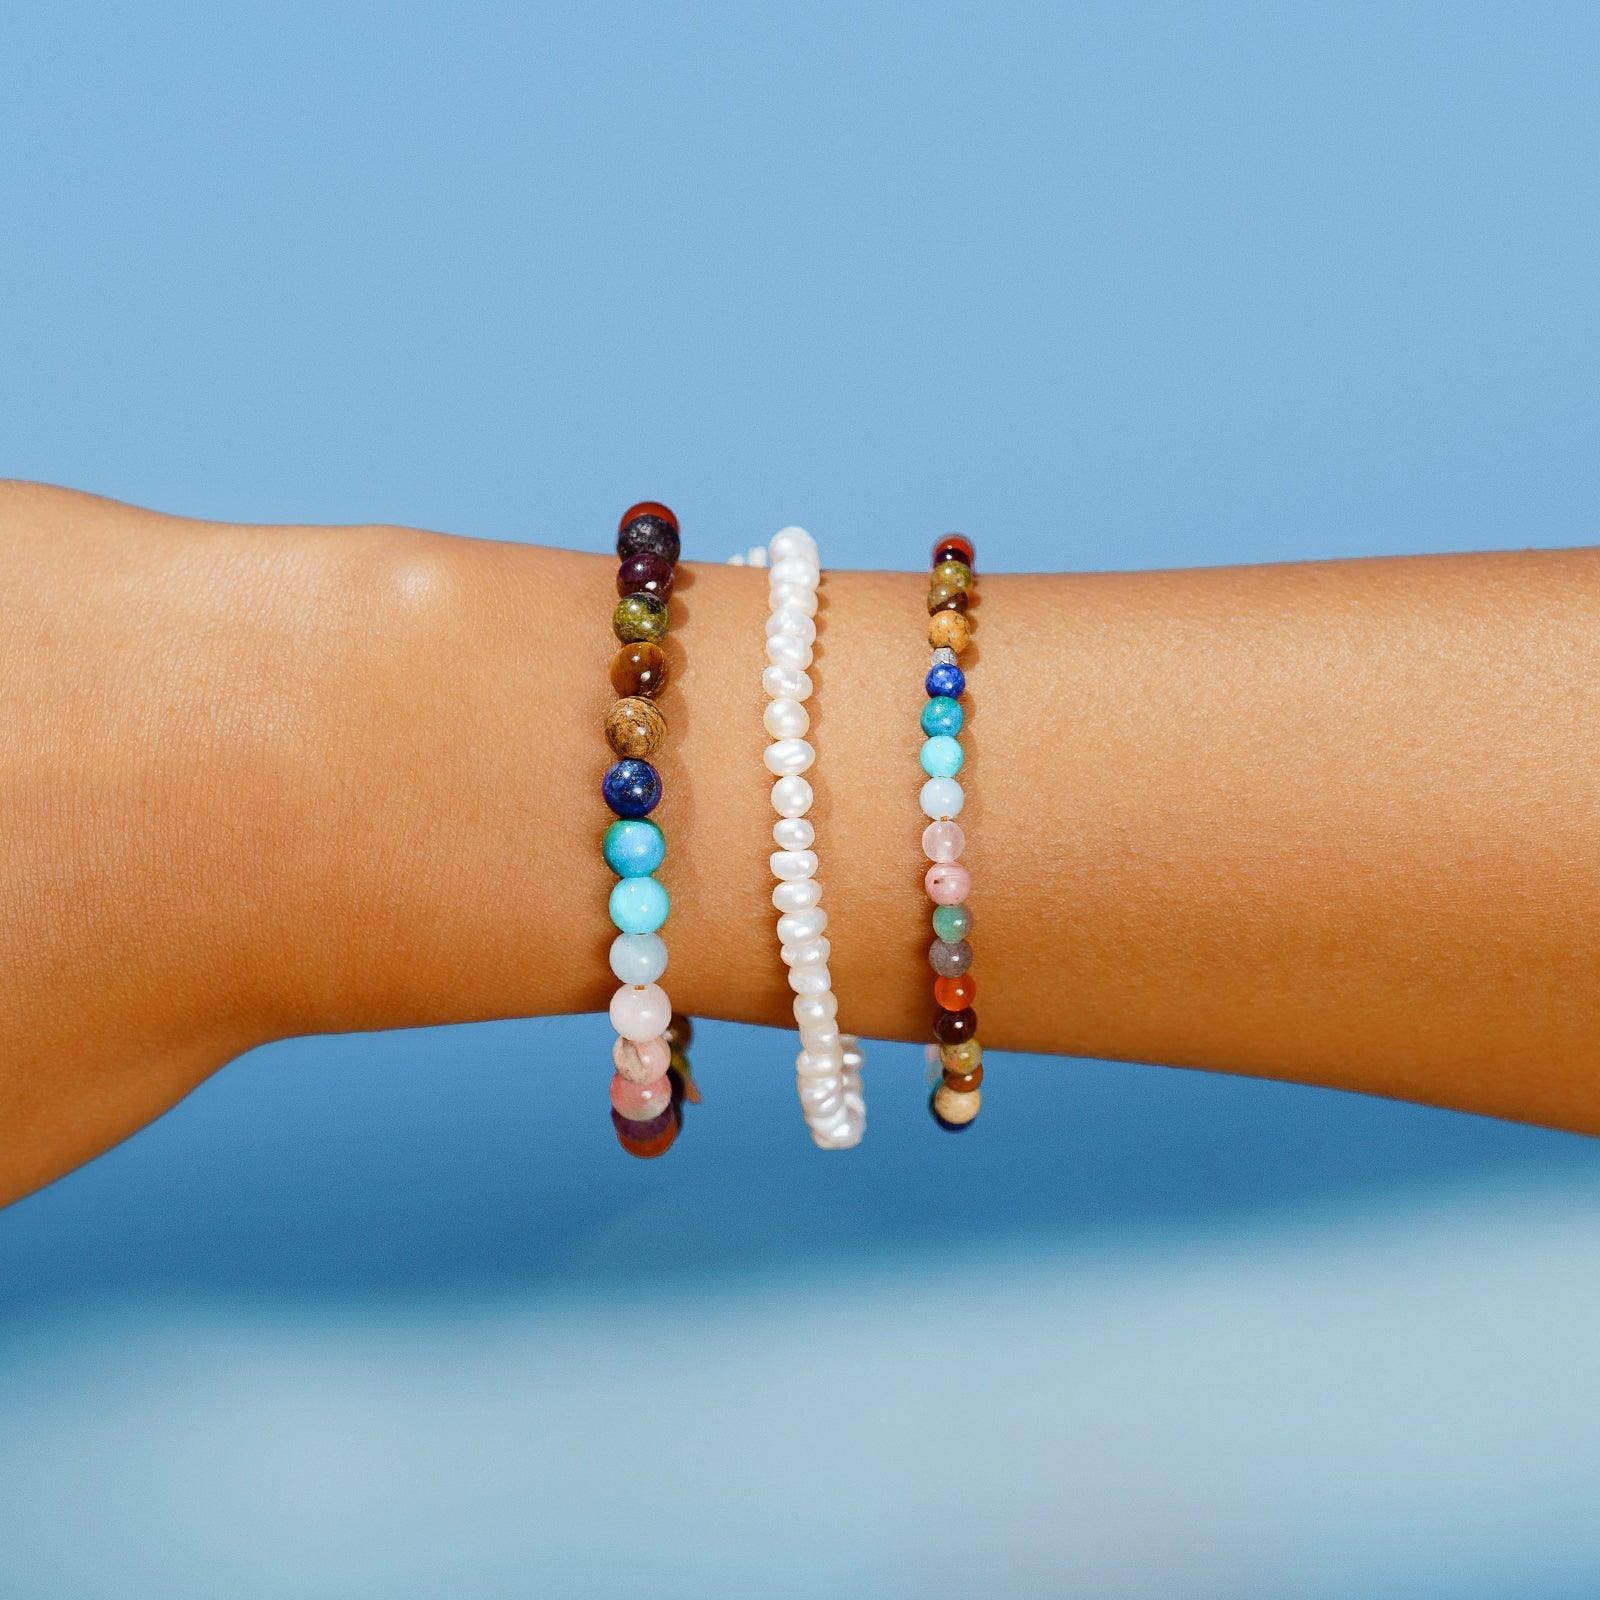 6mm multicolor stone healing bracelet with a coconut button clasp